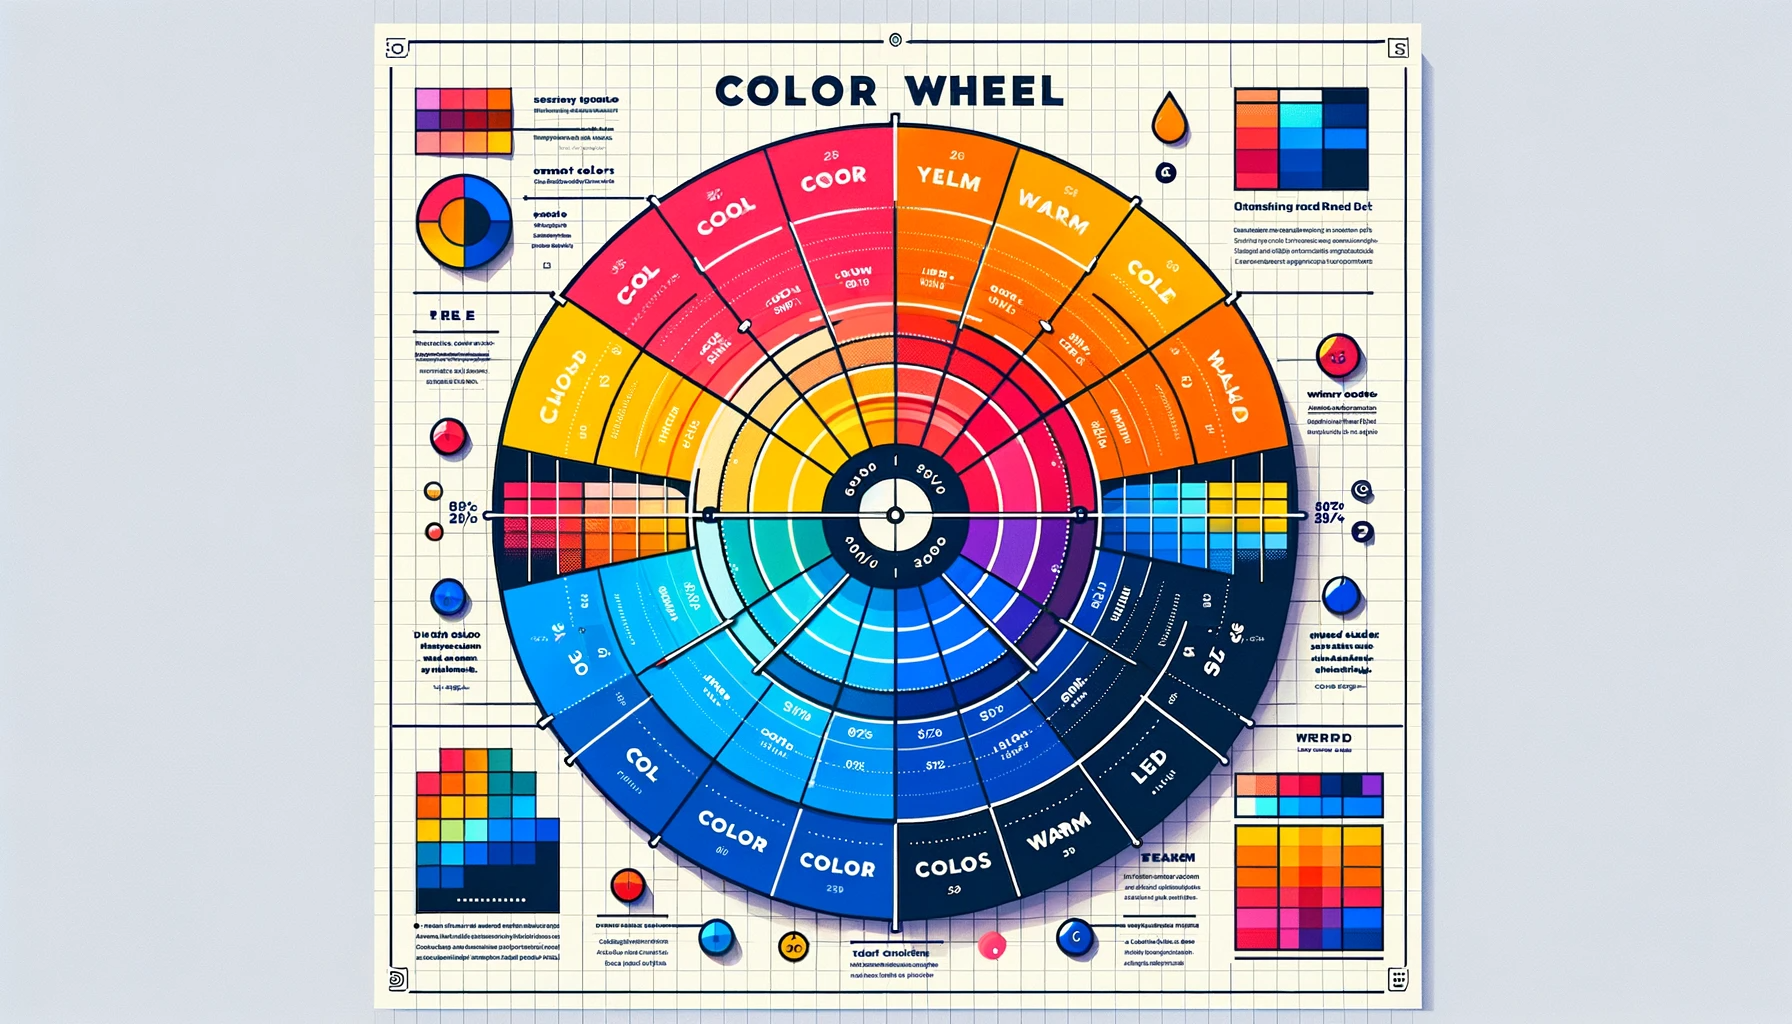 Dall·e 2023 11 28 13.24.19   Create a Modern and Visually Striking Infographic That Features a Color Wheel. the Color Wheel Should Be Large and Central, Divided Into Sections With